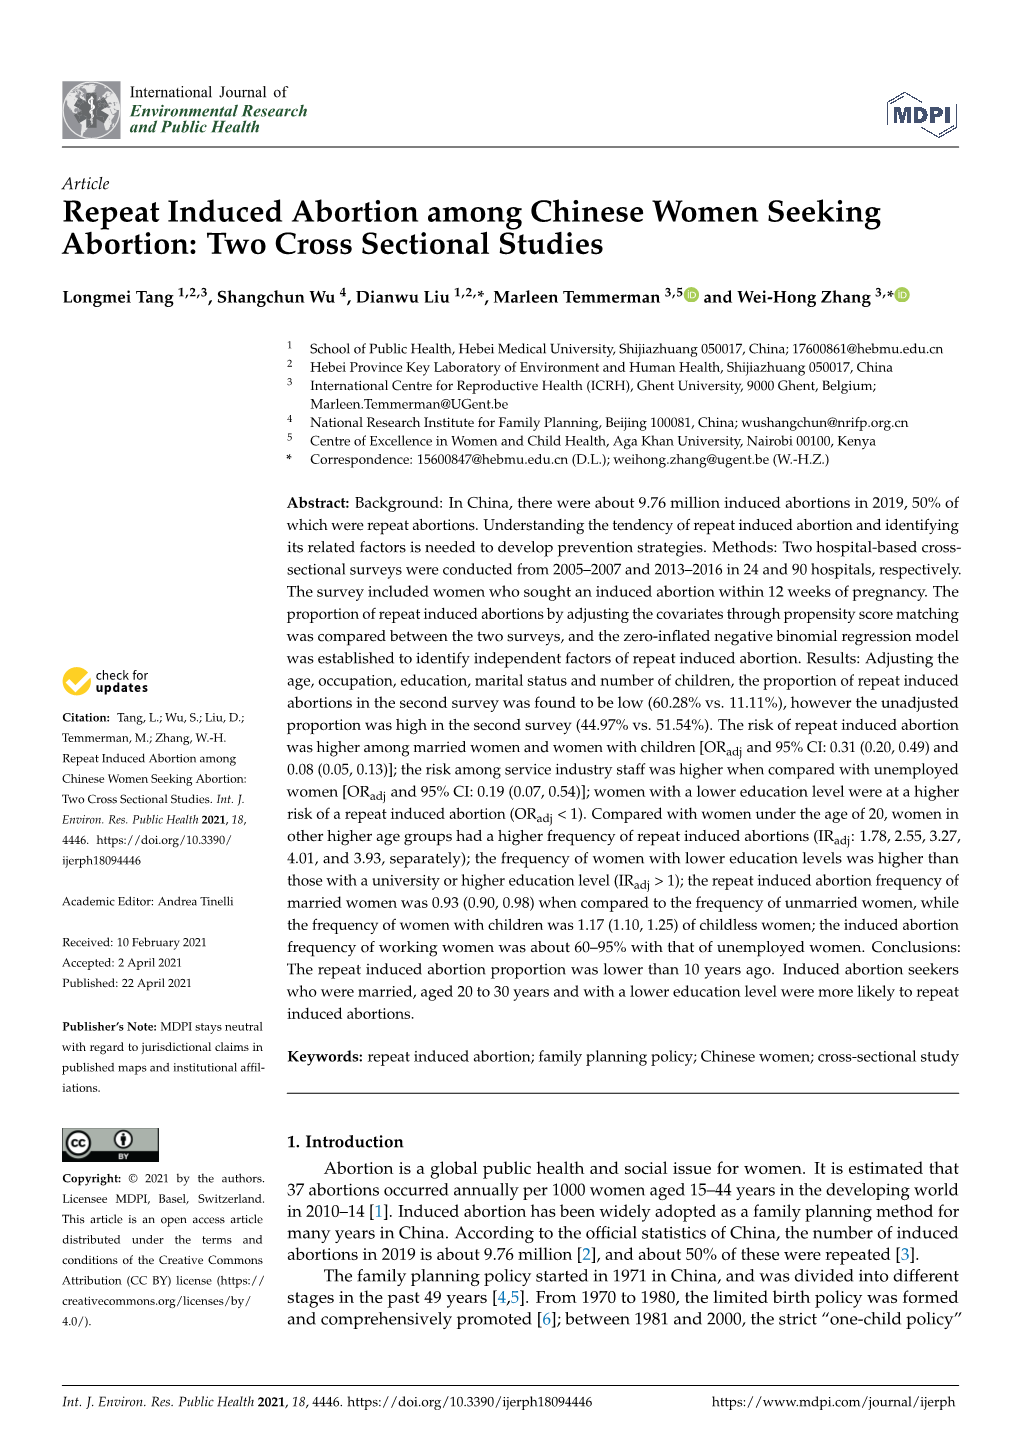 Repeat Induced Abortion Among Chinese Women Seeking Abortion: Two Cross Sectional Studies